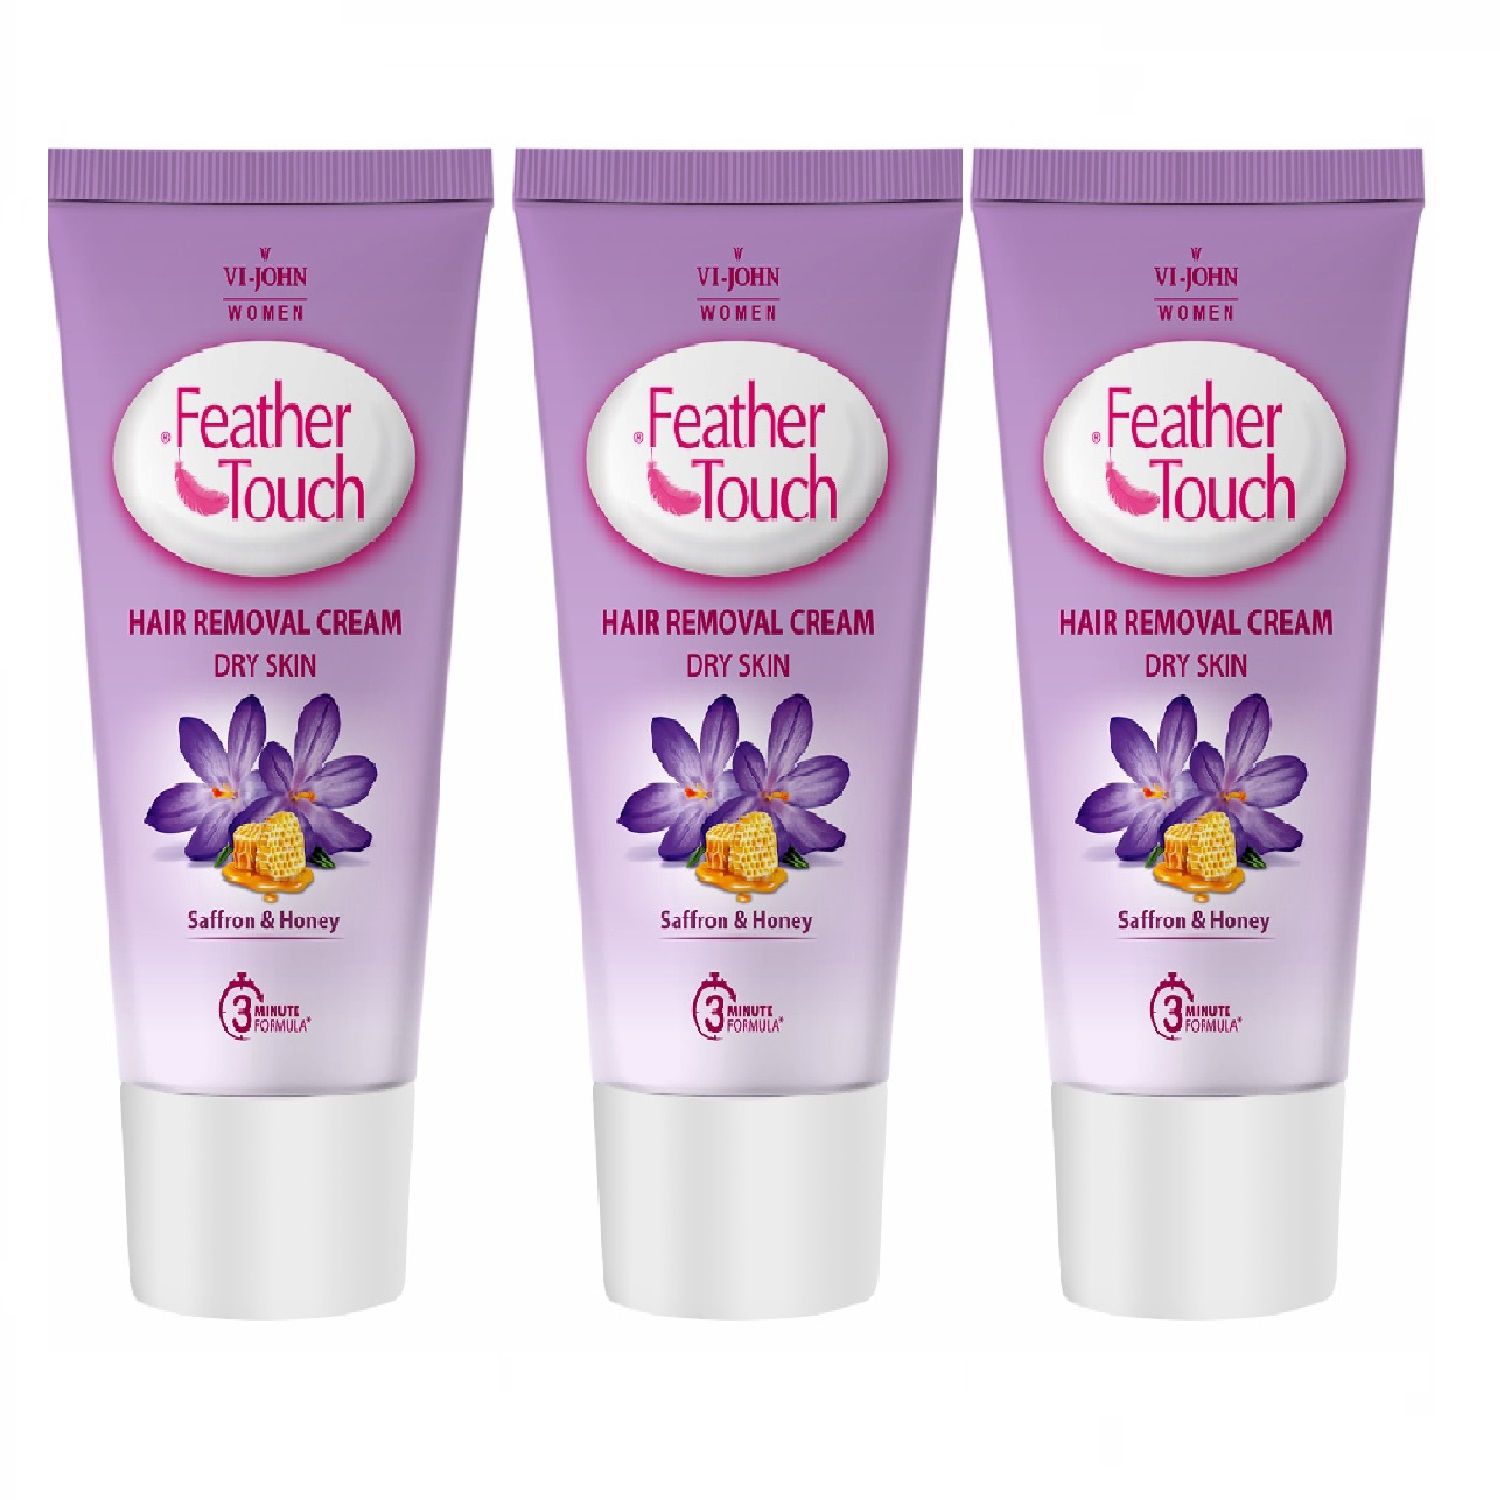     			VIJOHN Feather Touch Honey & Saffron Hair Removal Cream for Dry Skin 40g Each (Pack of 3)